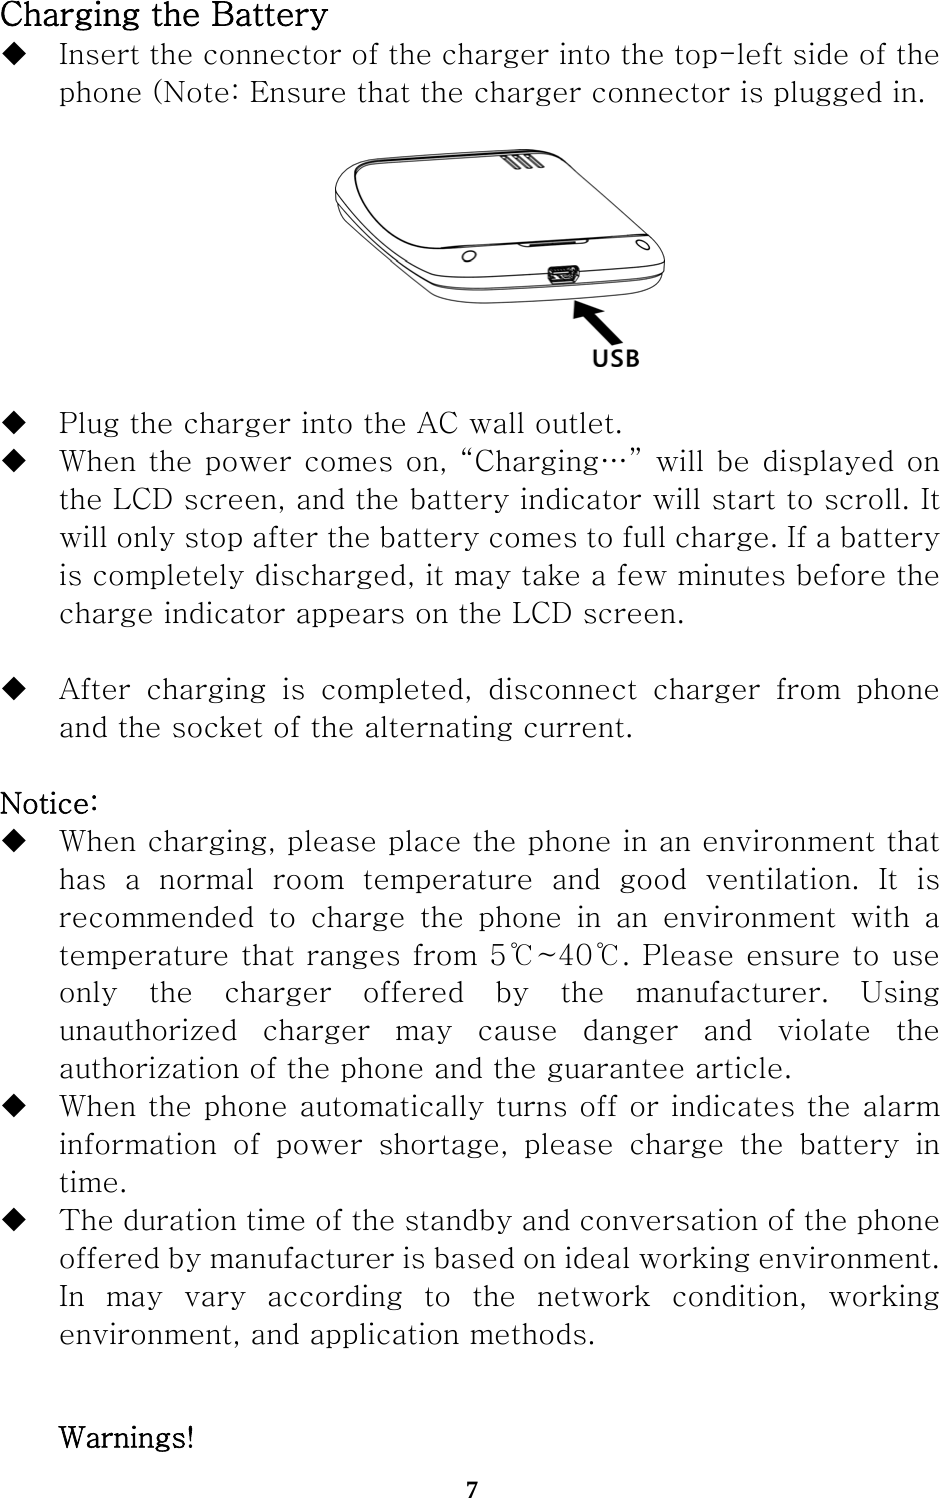  7 Charging the Battery  Insert the connector of the charger into the top-left side of the phone (Note: Ensure that the charger connector is plugged in.     Plug the charger into the AC wall outlet.  When the power comes on, “Charging…” will be displayed on the LCD screen, and the battery indicator will start to scroll. It will only stop after the battery comes to full charge. If a battery is completely discharged, it may take a few minutes before the charge indicator appears on the LCD screen.   After  charging  is  completed,  disconnect  charger  from  phone and the socket of the alternating current.  Notice:  When charging, please place the phone in an environment that   has  a  normal  room  temperature  and  good  ventilation.  It  is recommended  to  charge  the  phone  in  an  environment  with  a temperature that ranges from 5℃~40℃. Please ensure to use only the charger offered by the manufacturer. Using unauthorized  charger  may  cause  danger  and  violate  the authorization of the phone and the guarantee article.    When the phone automatically turns off or indicates the alarm information of power shortage, please charge the battery in time.  The duration time of the standby and conversation of the phone offered by manufacturer is based on ideal working environment. In may vary according to the network condition, working environment, and application methods.  Warnings! 